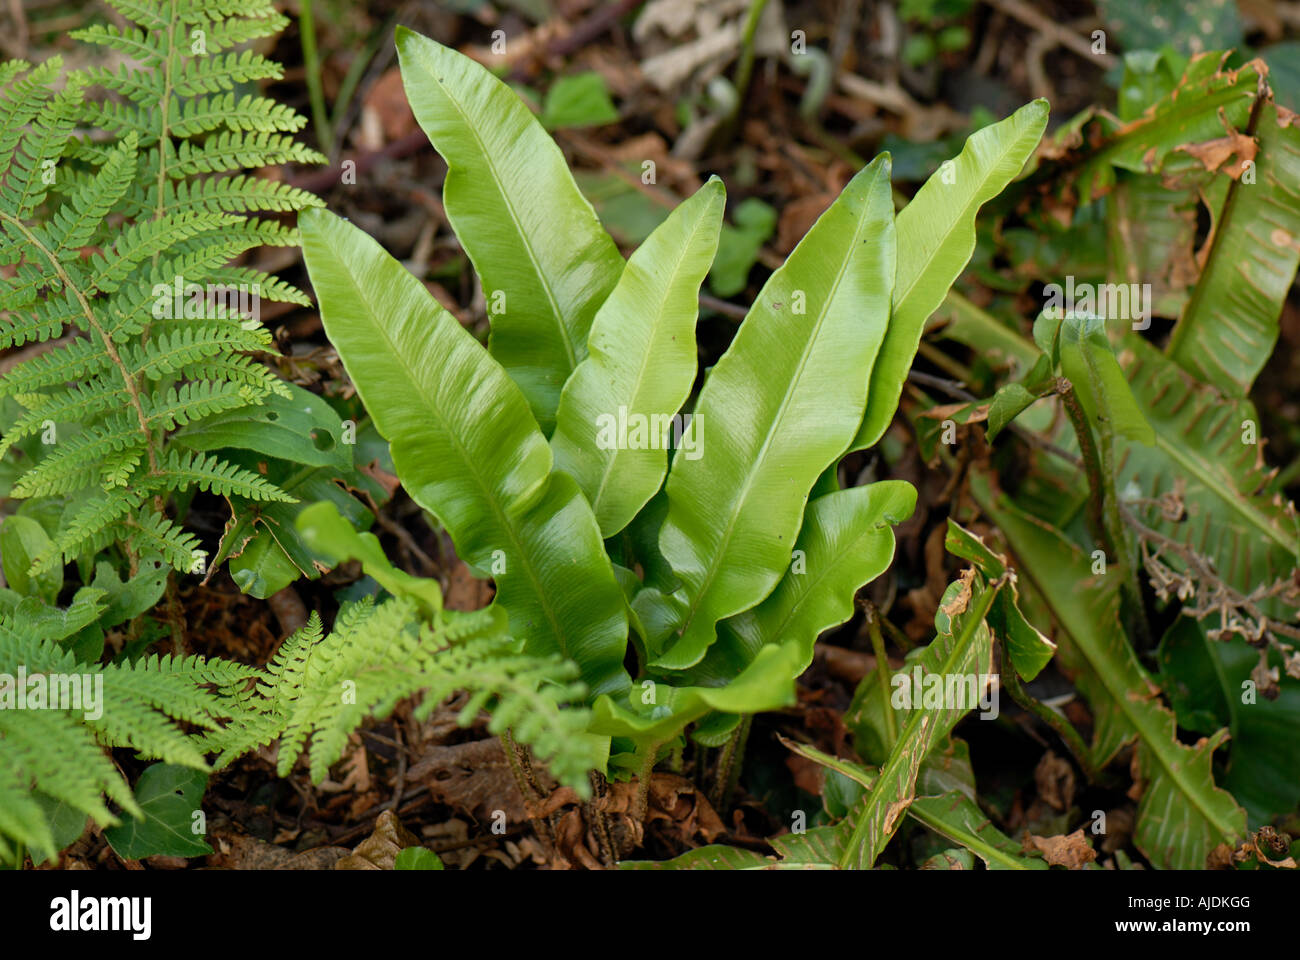 Harts tongue fern Asplenium scolopendrium plant with other ferns on a woodland floor Stock Photo